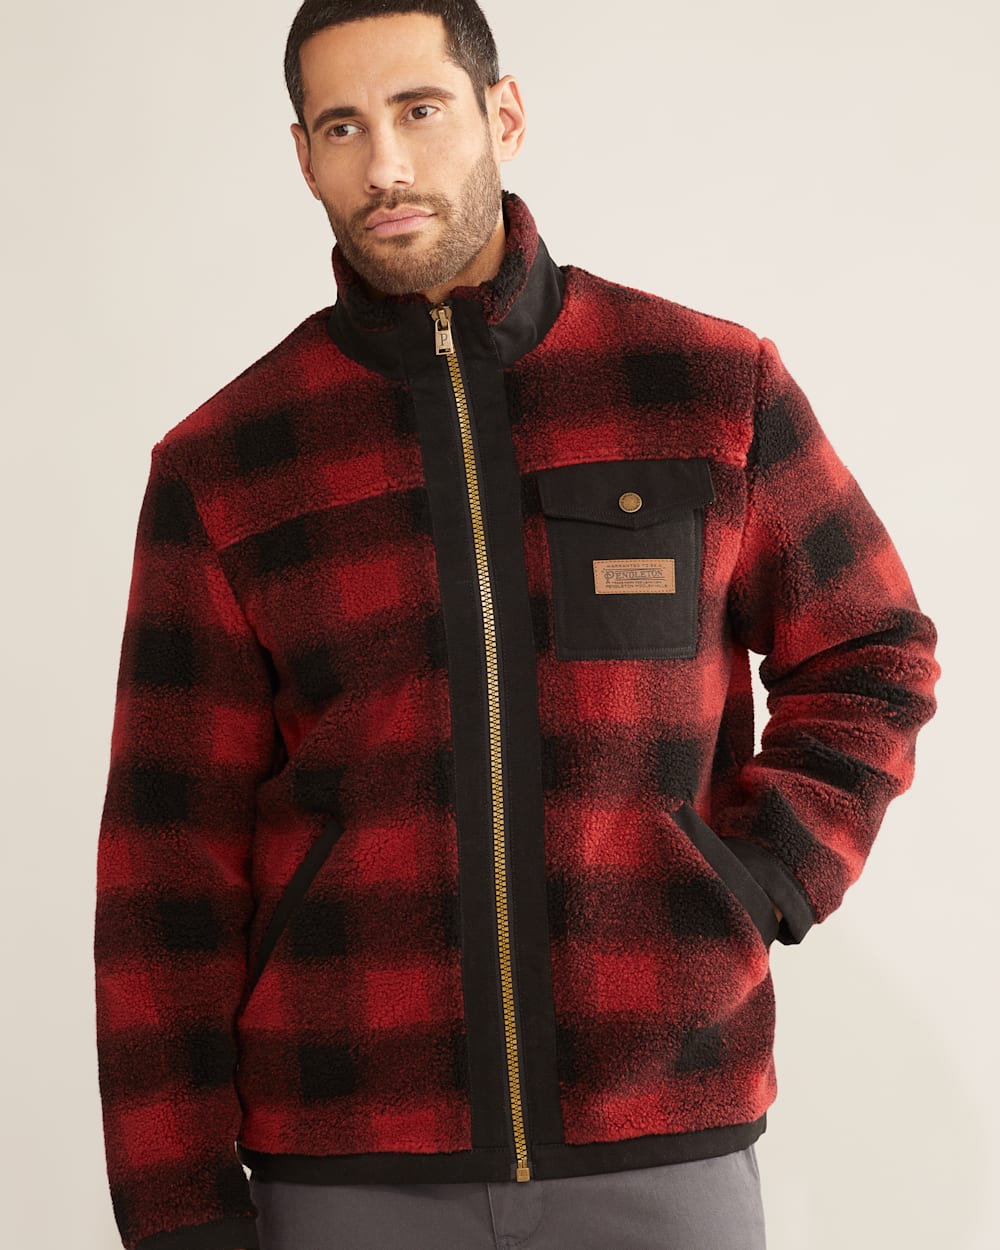 ALTERNATE VIEW OF MEN'S LONE FIR STAND-COLLAR FLEECE JACKET IN RED BUFFALO CHECK image number 5